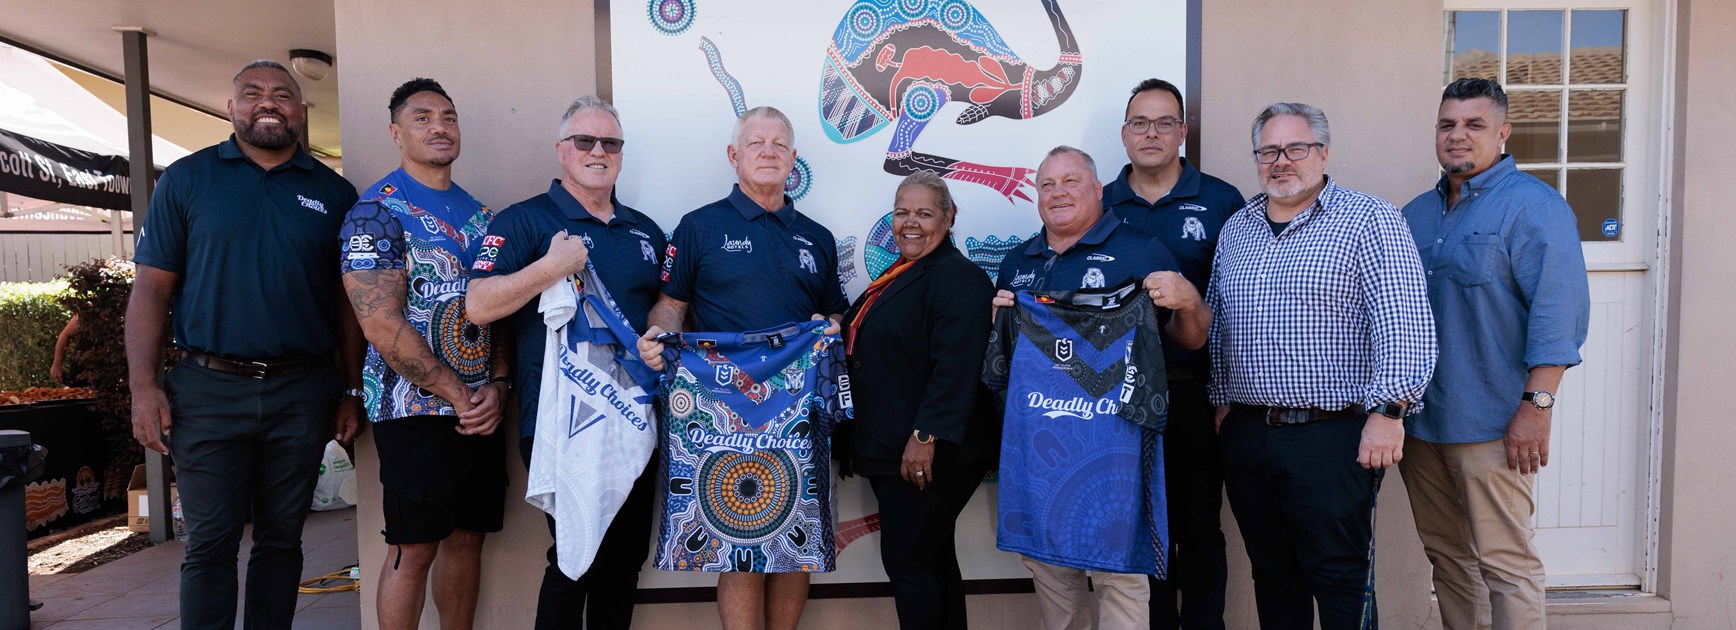 Bulldogs unveil the Deadly Choices health check shirt varieties at Toowoomba’s Goolburri Aboriginal Health Advancement Company Limited.